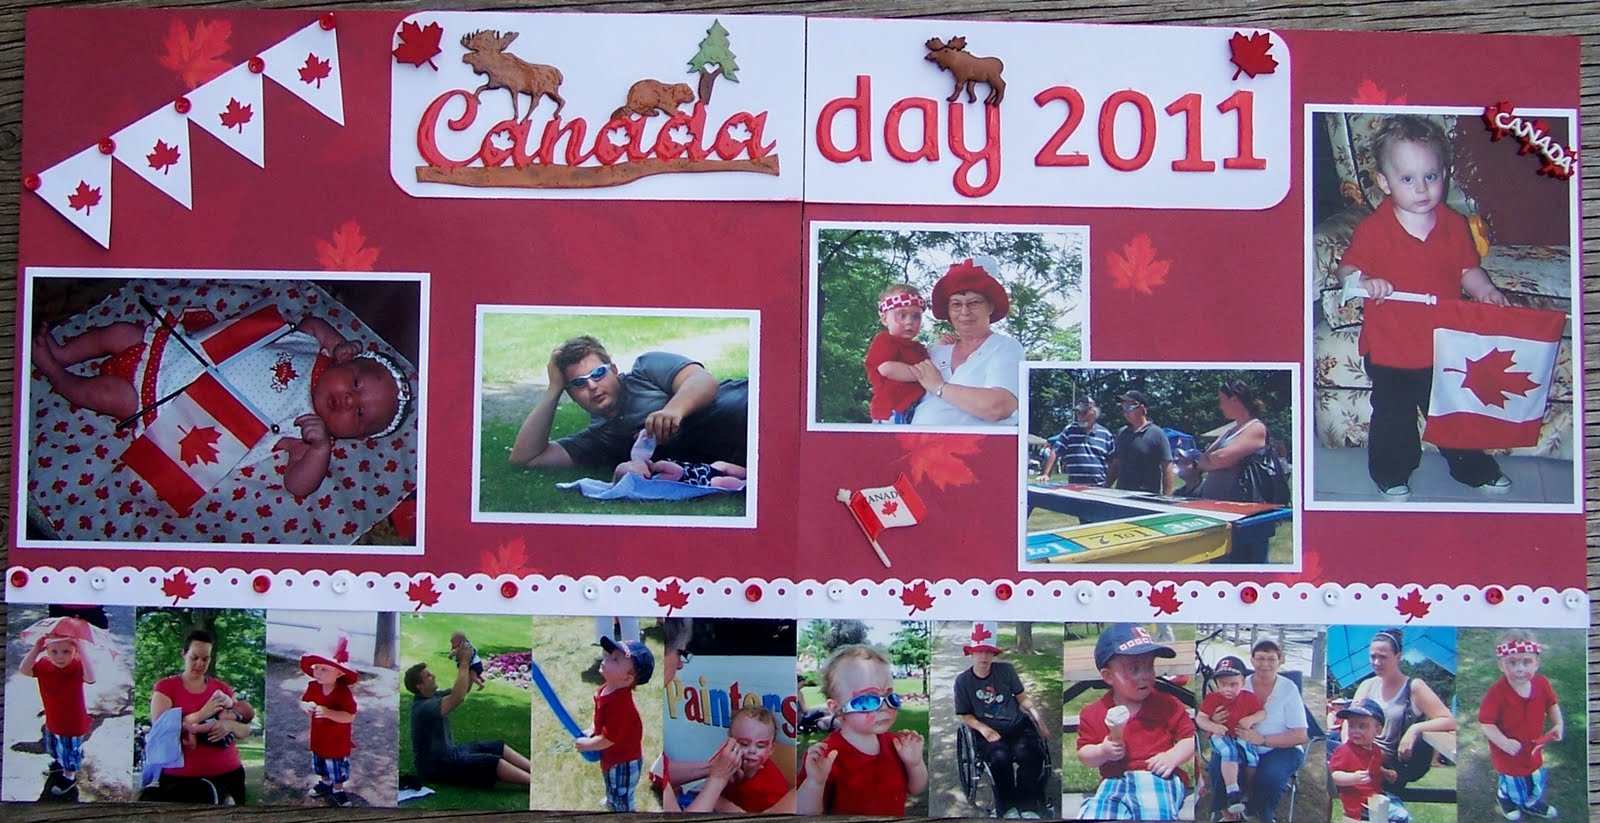 Canada+day+2011+images